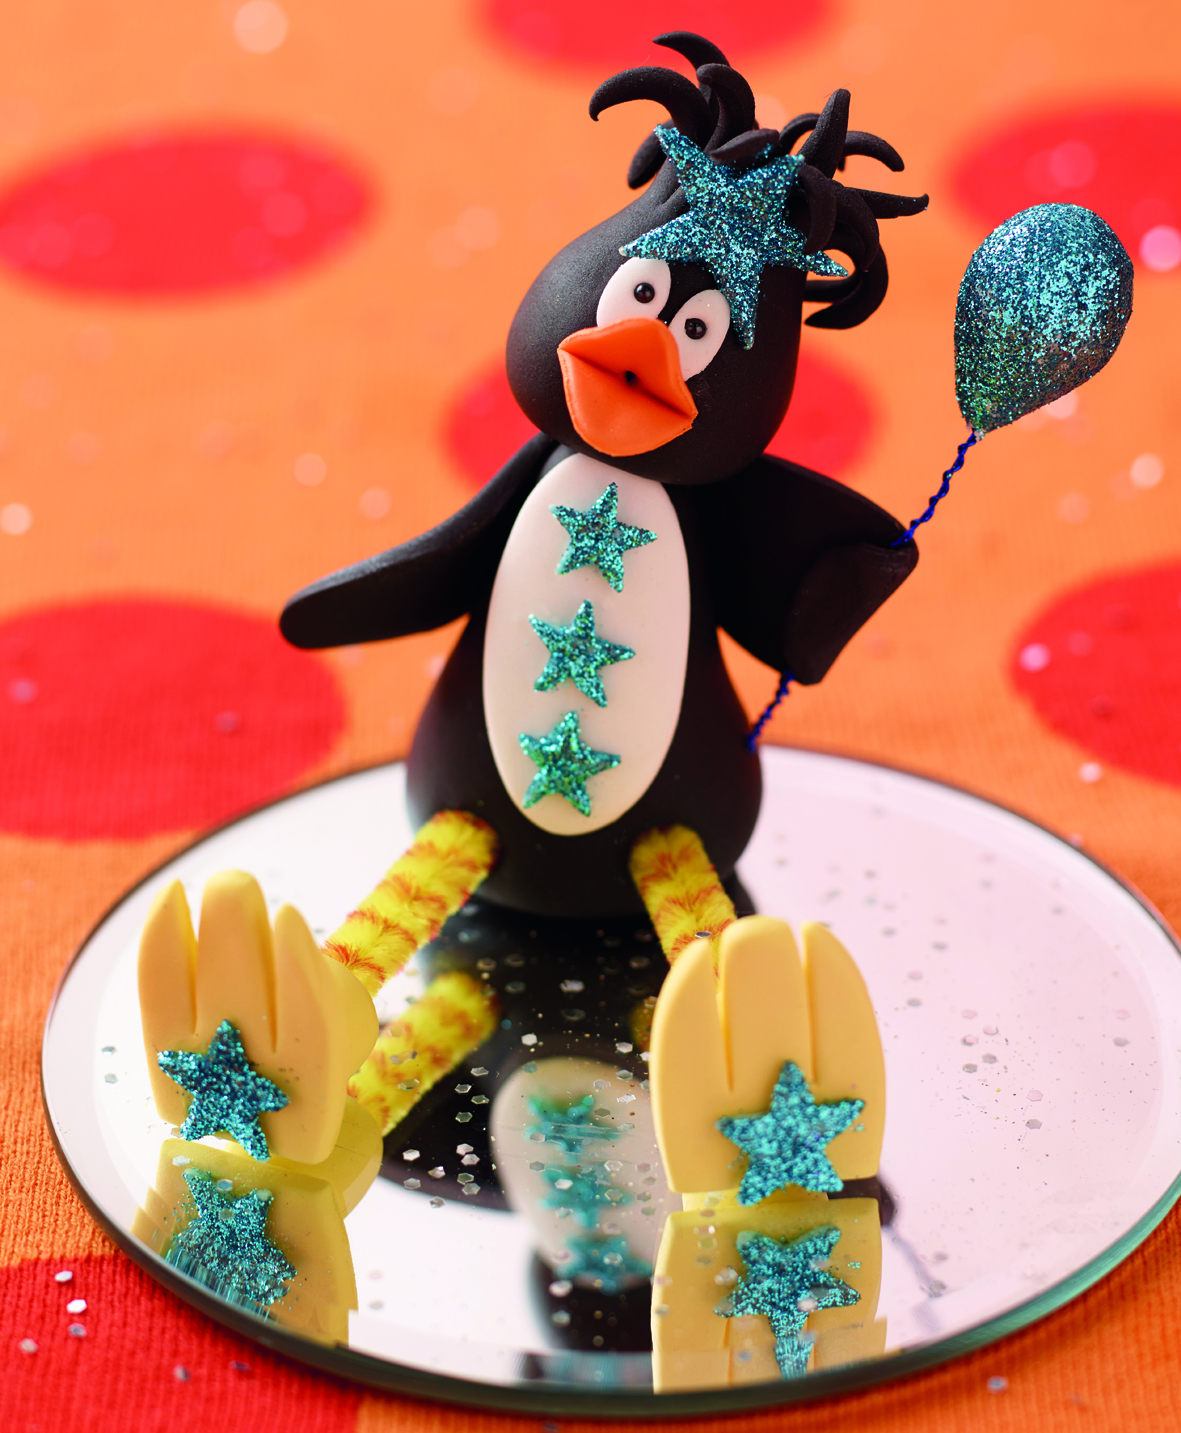 12 Days of Penguin... On the fourth day of Penguin